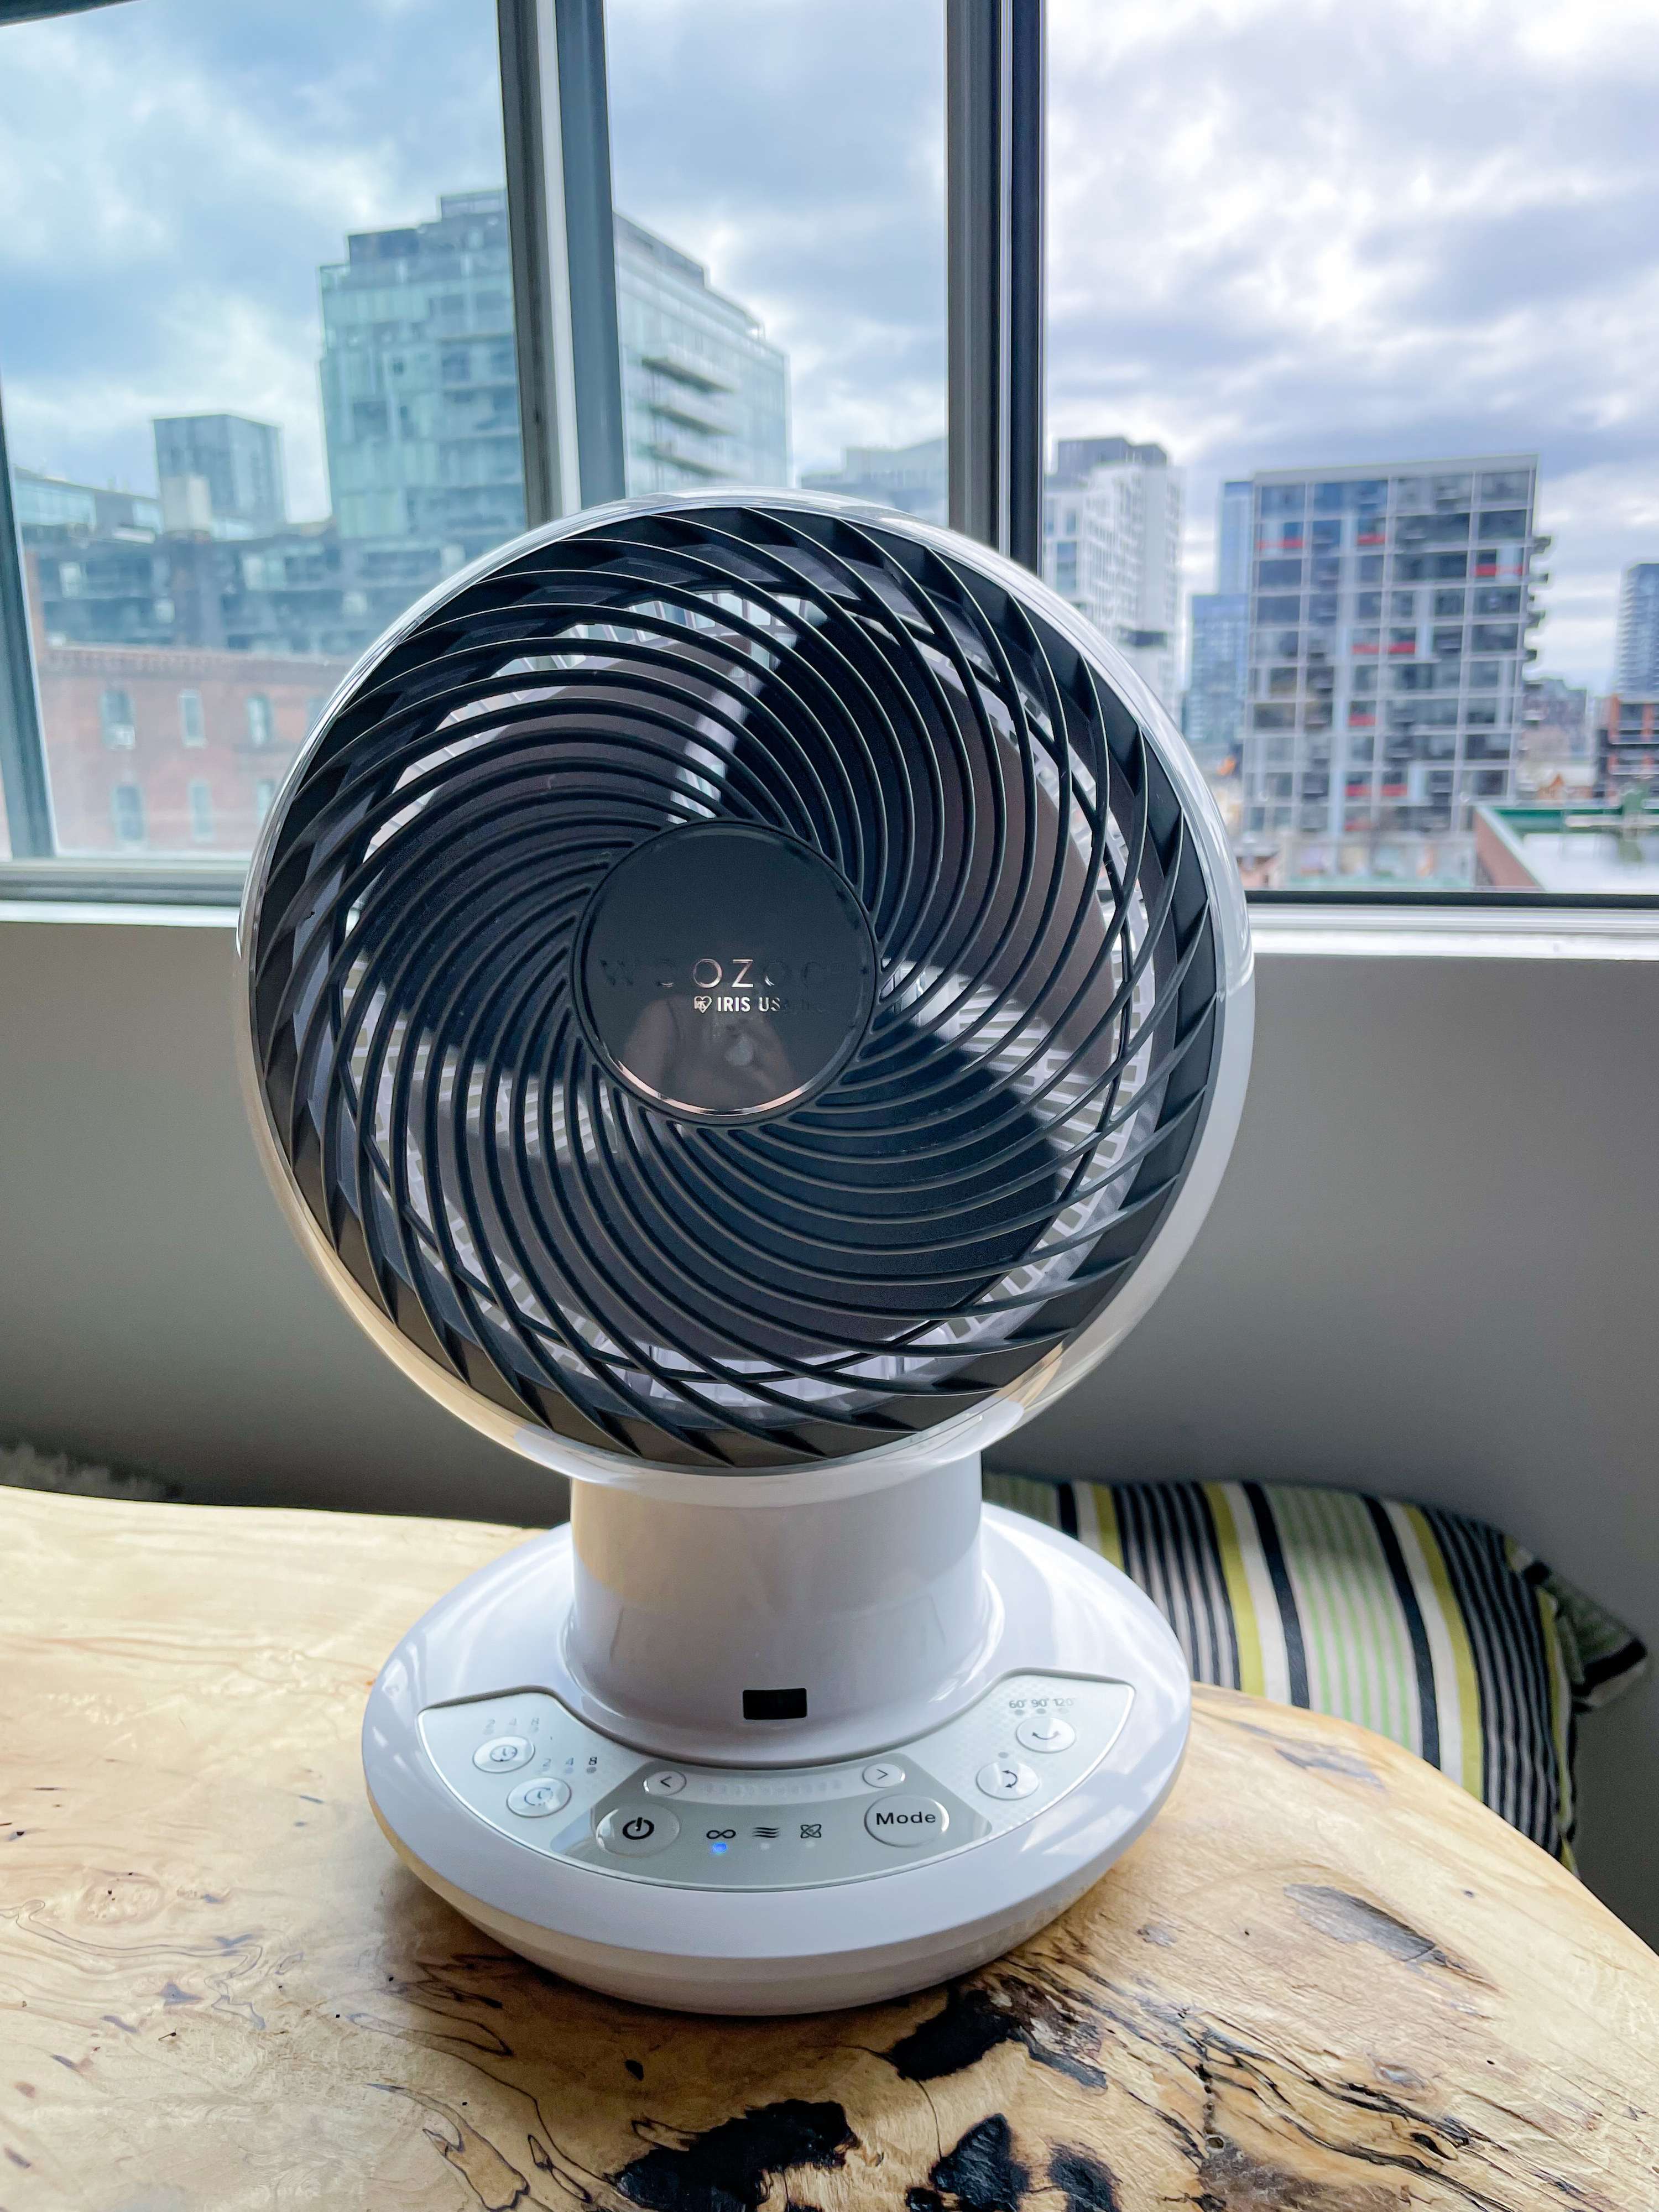 the circular oscillating fan placed on a wooden tabletop with a window visible in the background